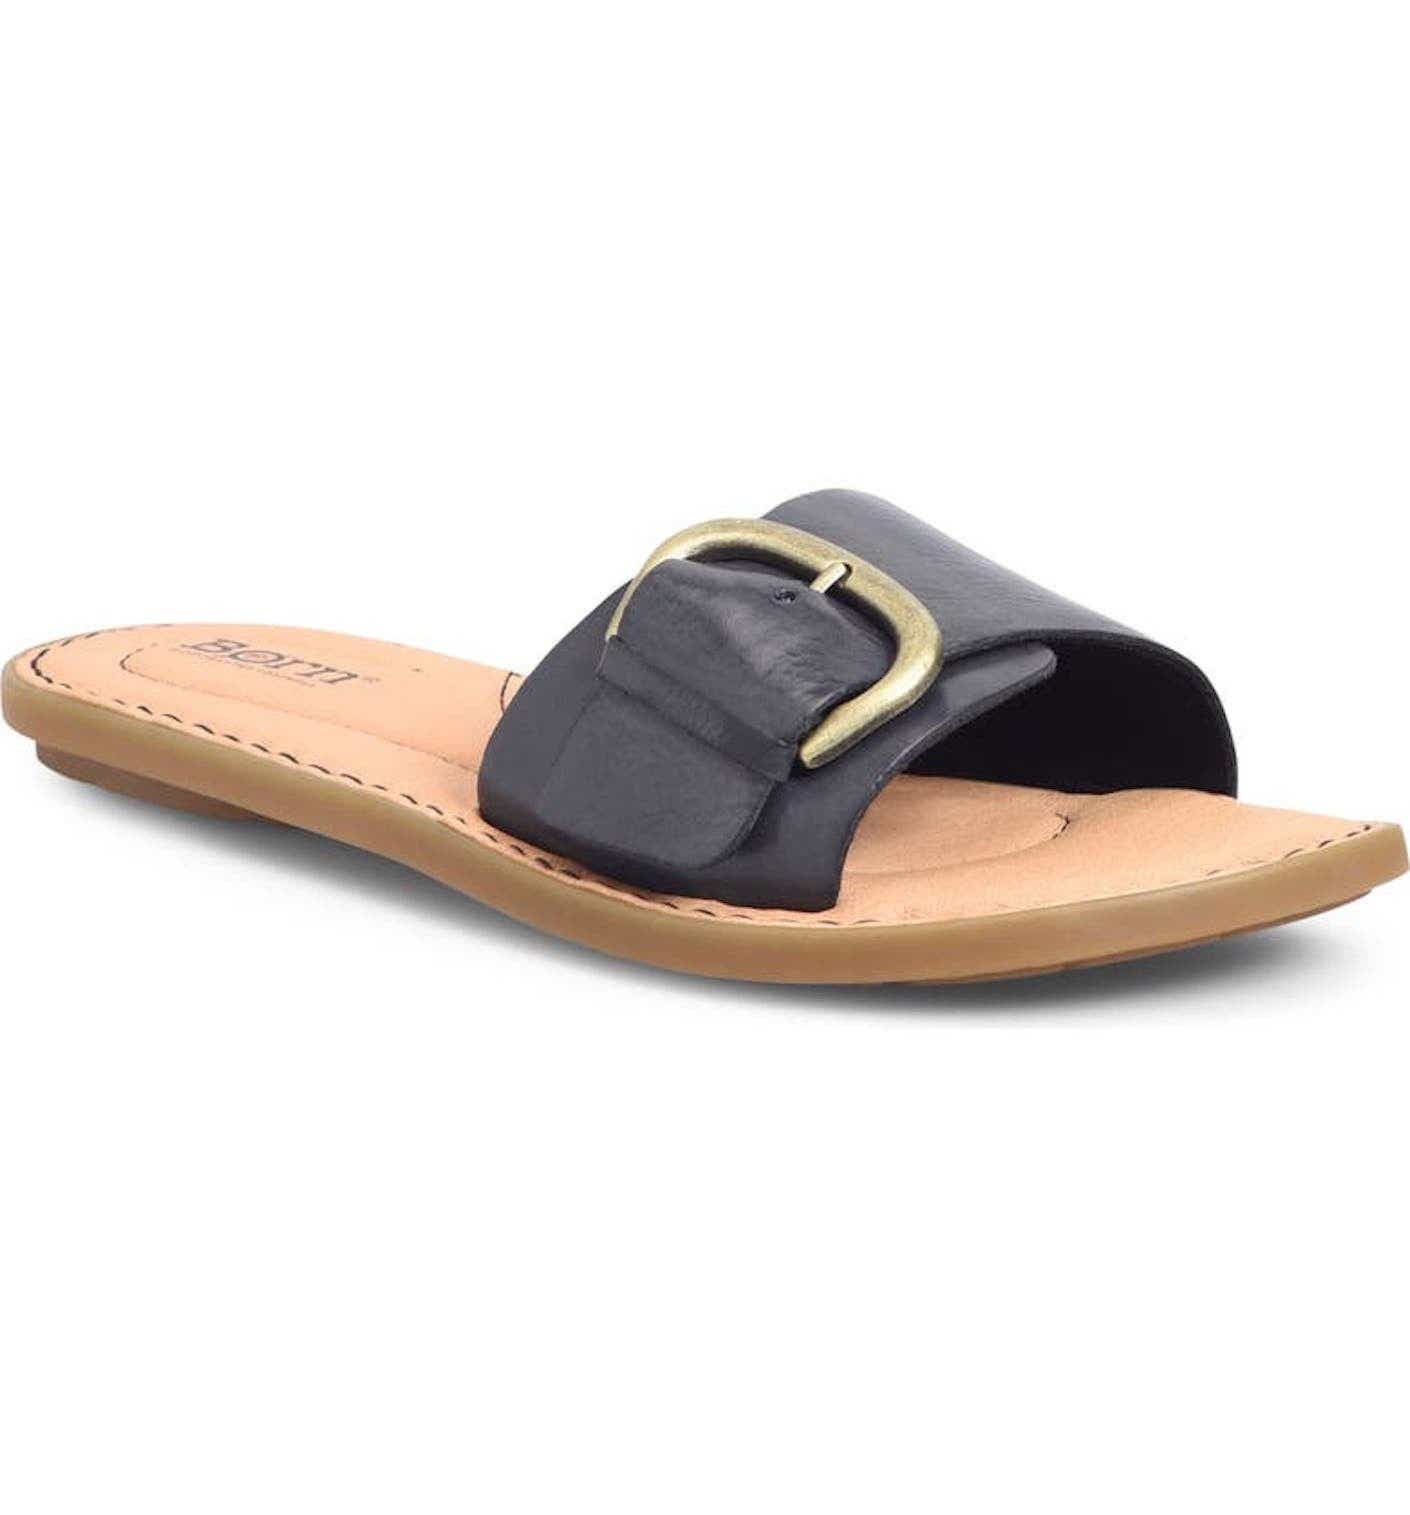 A flat, brown sandal with a buckled, black leather strap.